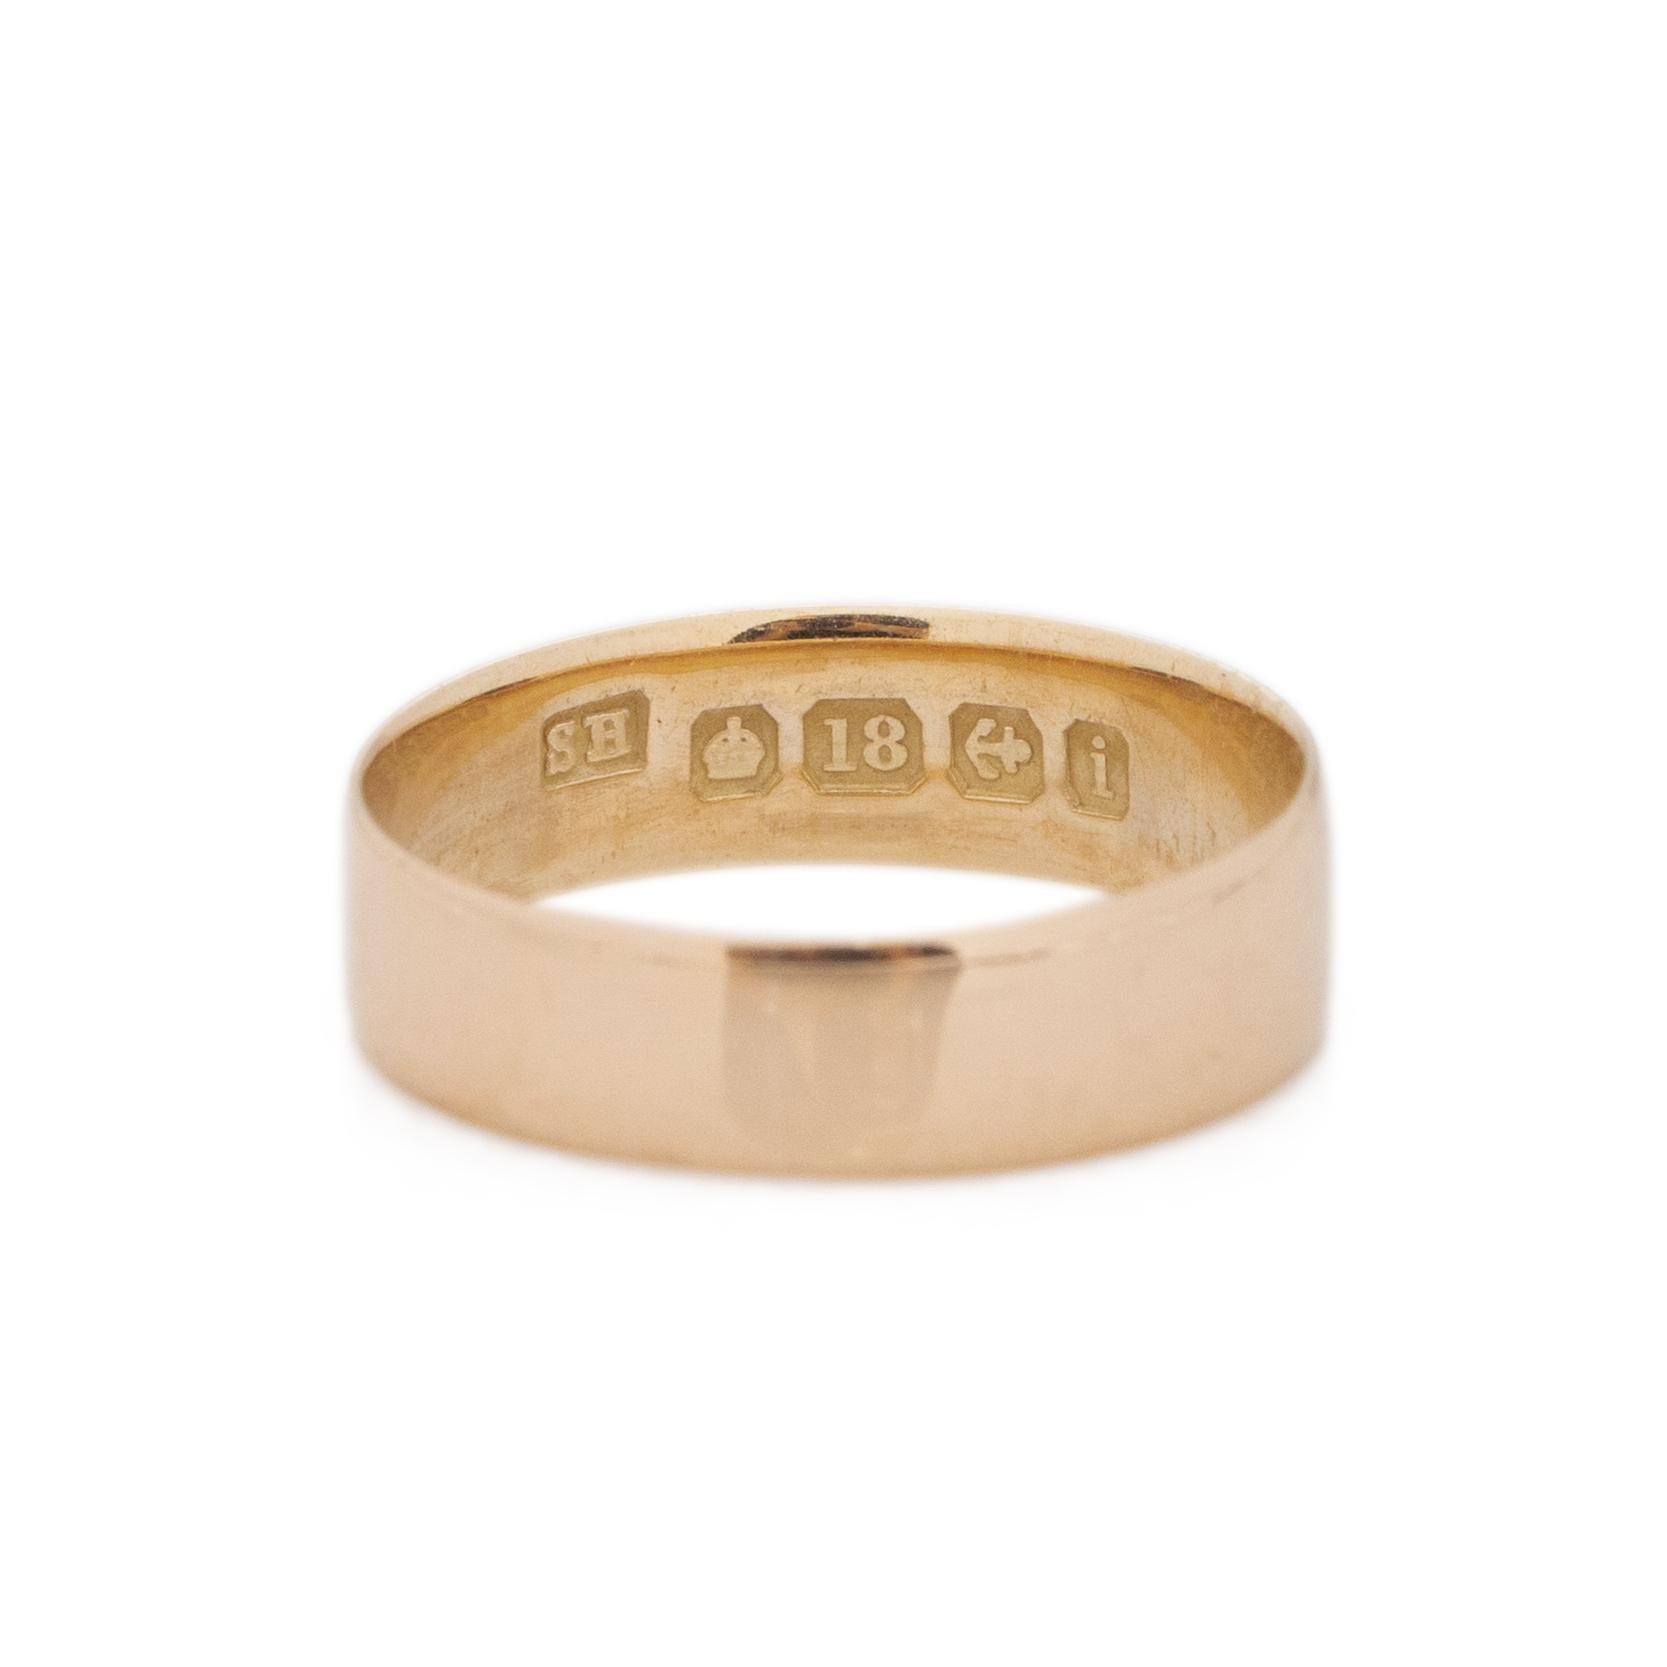 Here we have a classic band ring with beautiful British hallmarks. Crafted in 18K yellow gold, this band has a excellent smooth finish with a pristine shine. The hallmarks indicate that it is crafted in 18K, the anchor is the Birmingham essay stamp,